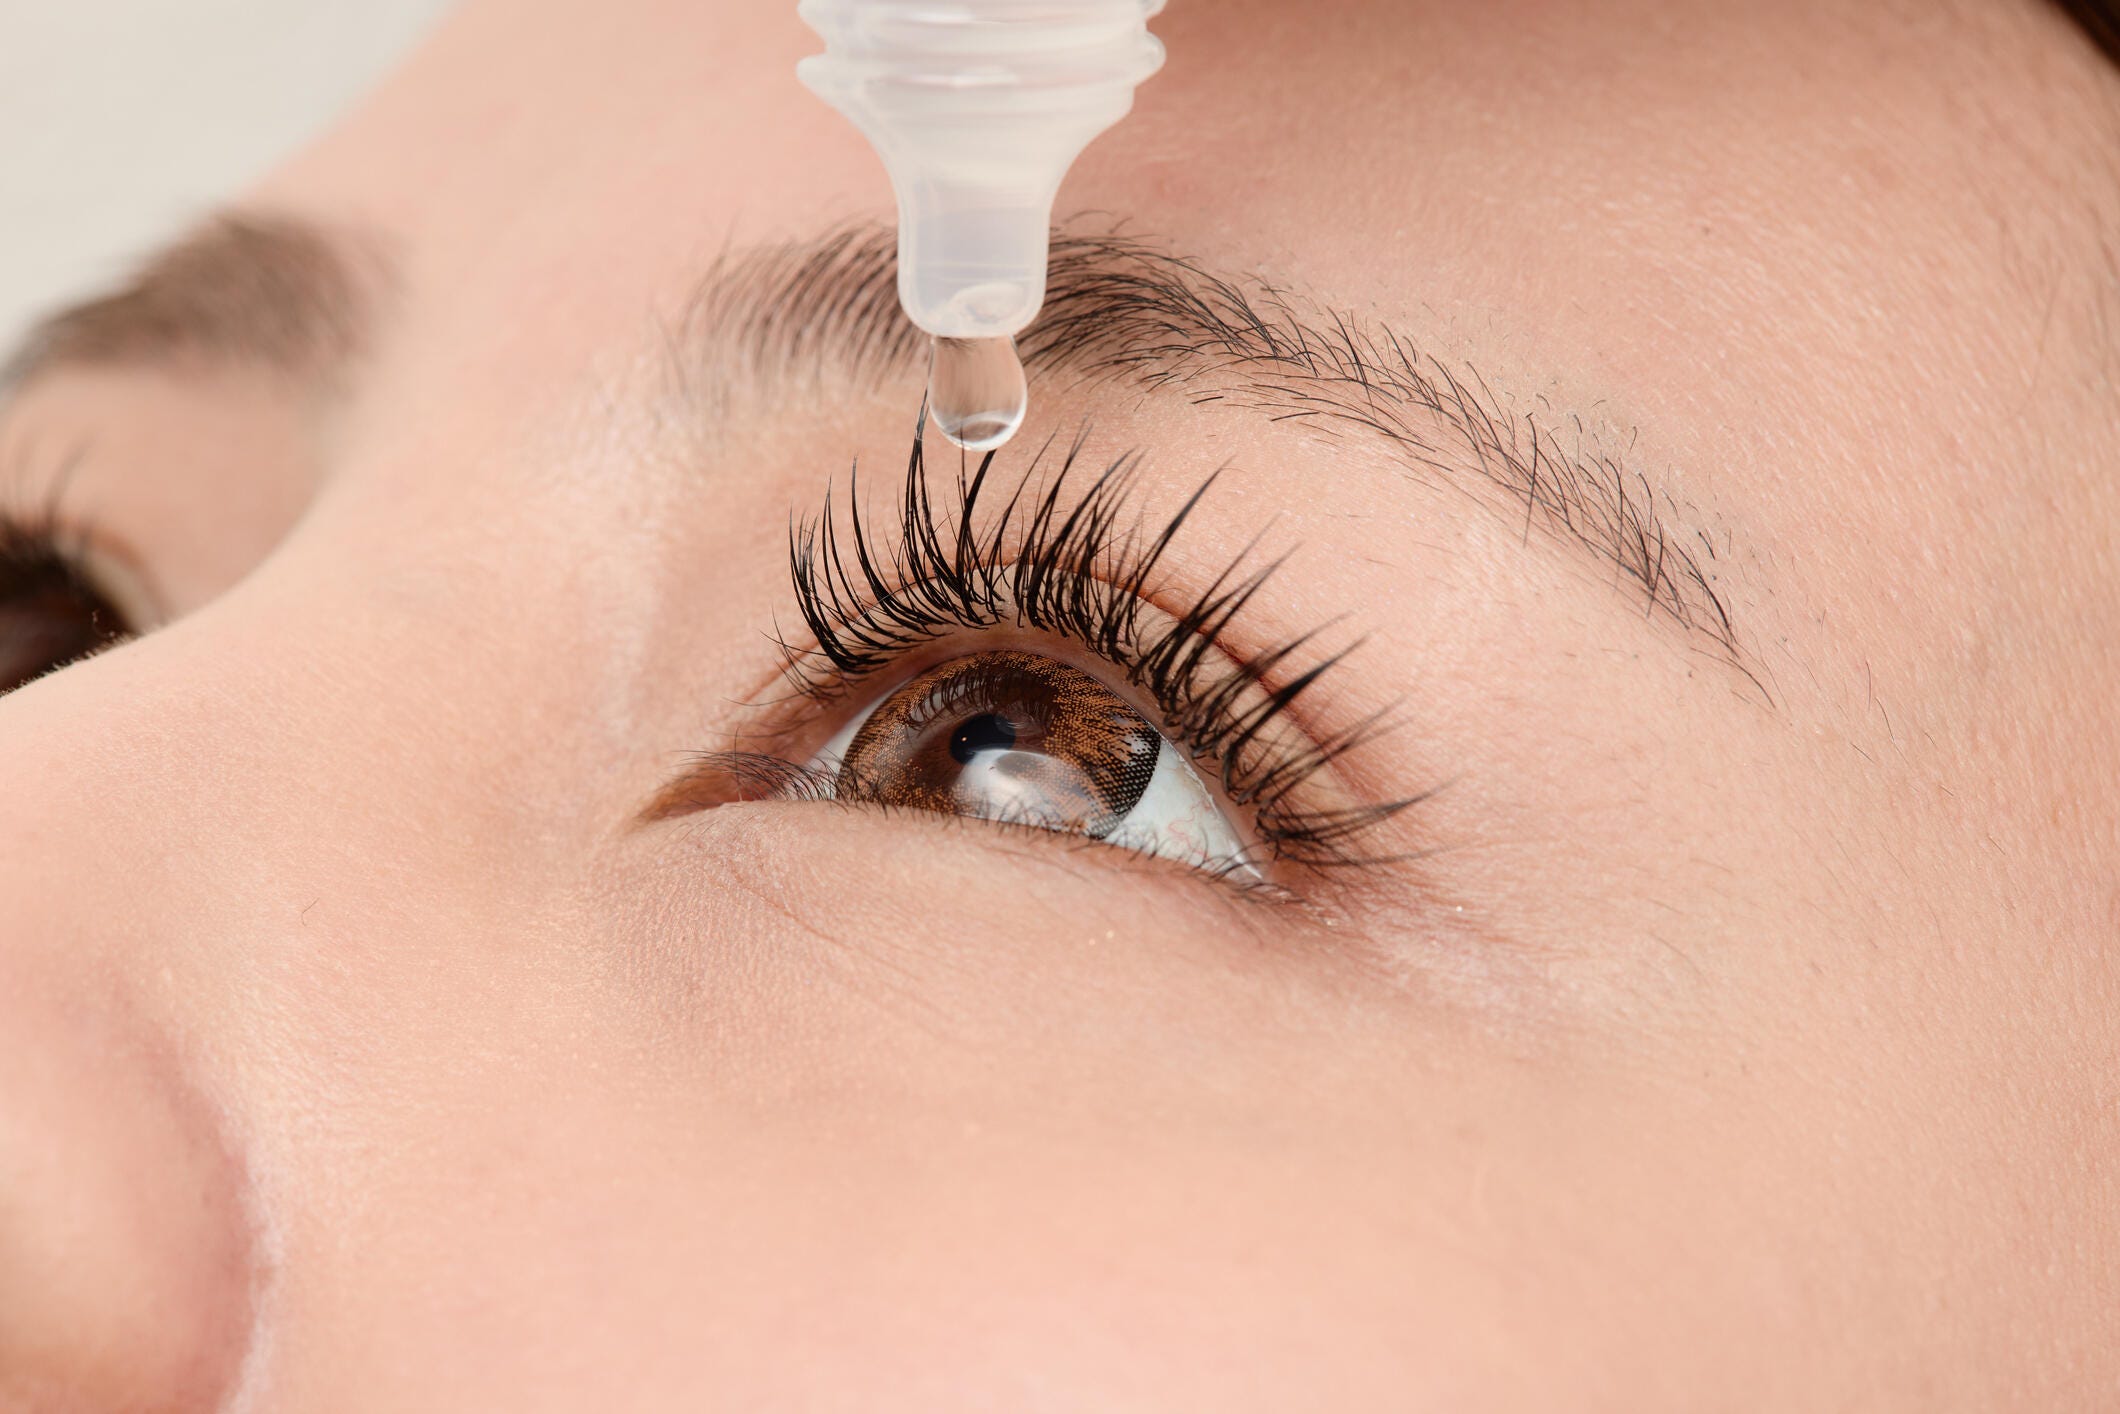 How to Find Safe Eye Drops